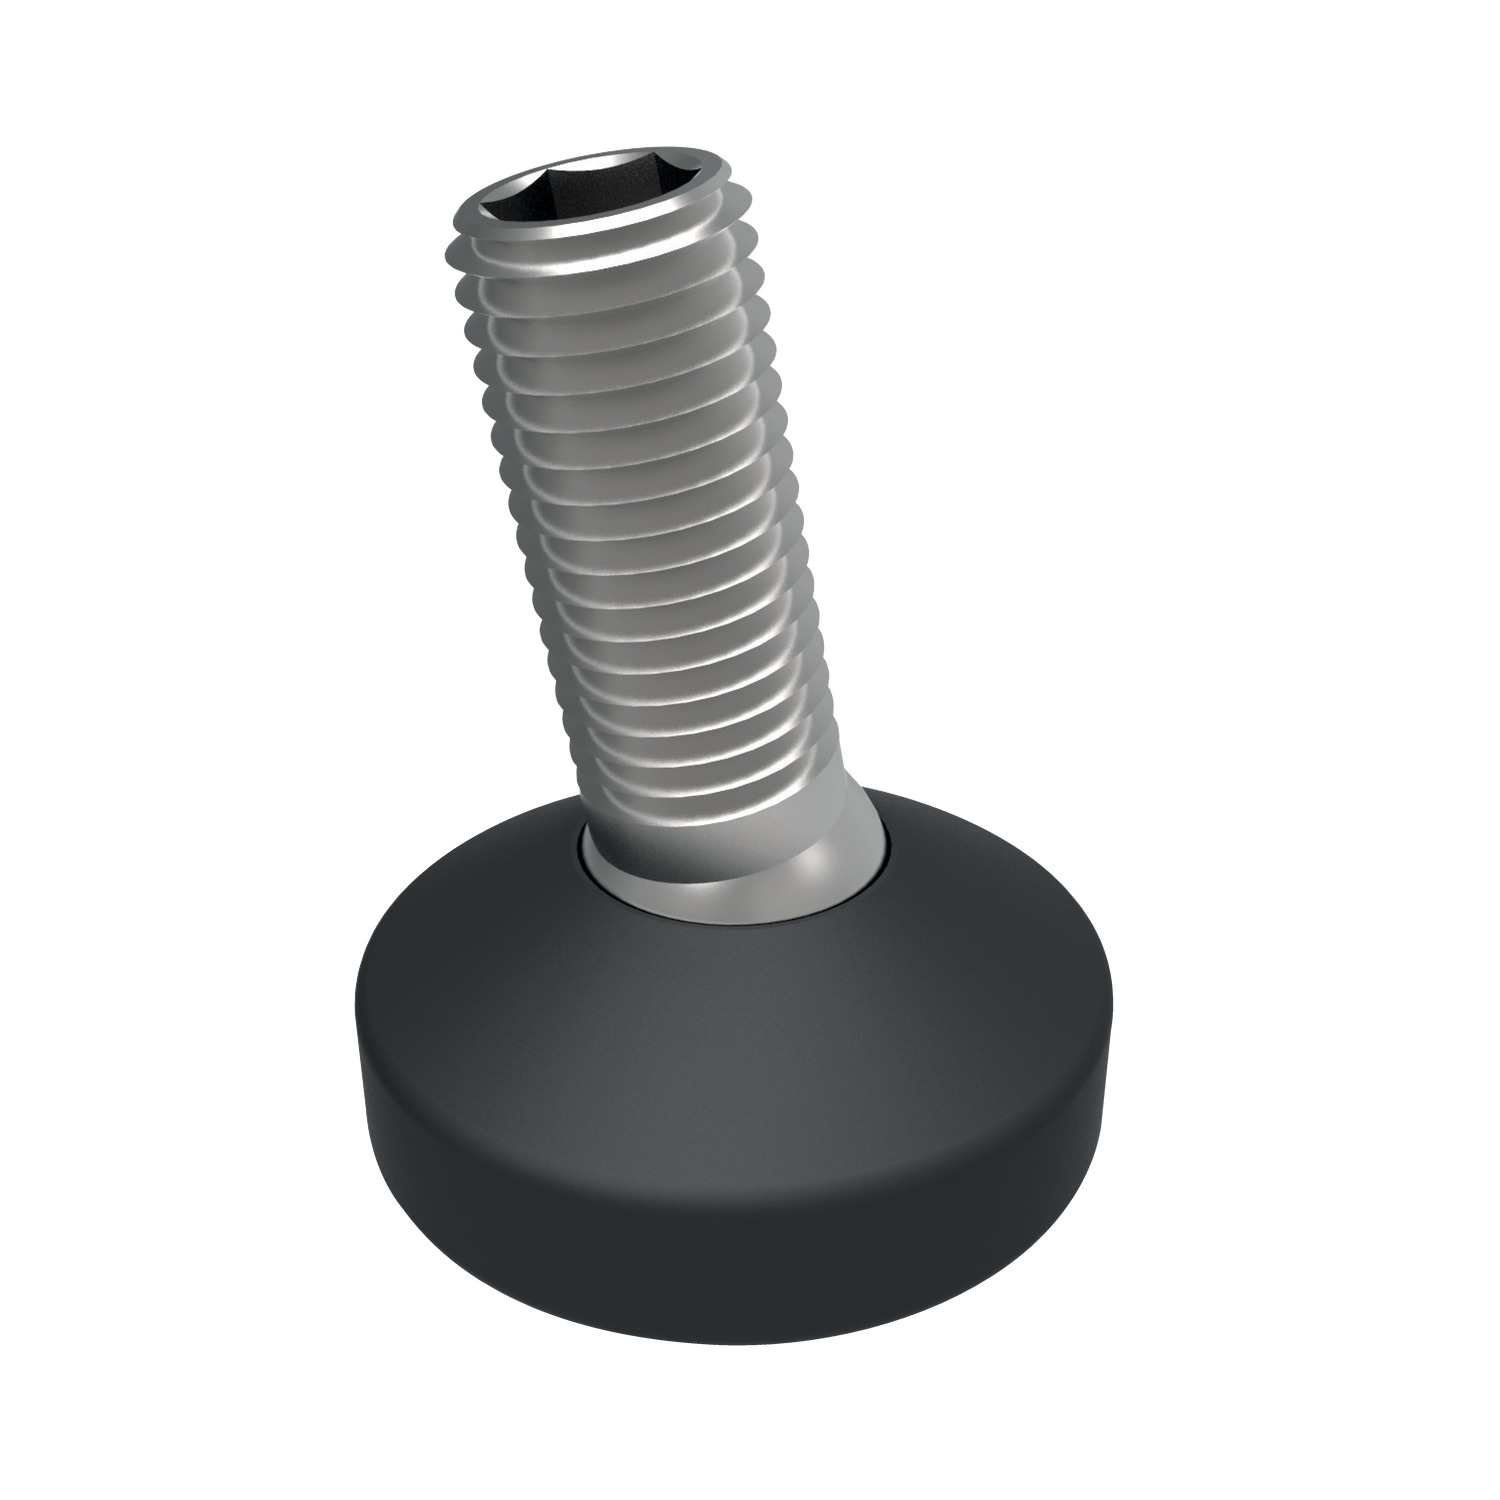 Levelling Feet This articulating foot comes with M8 thread and is ideal for smaller applications and offer discrete support.